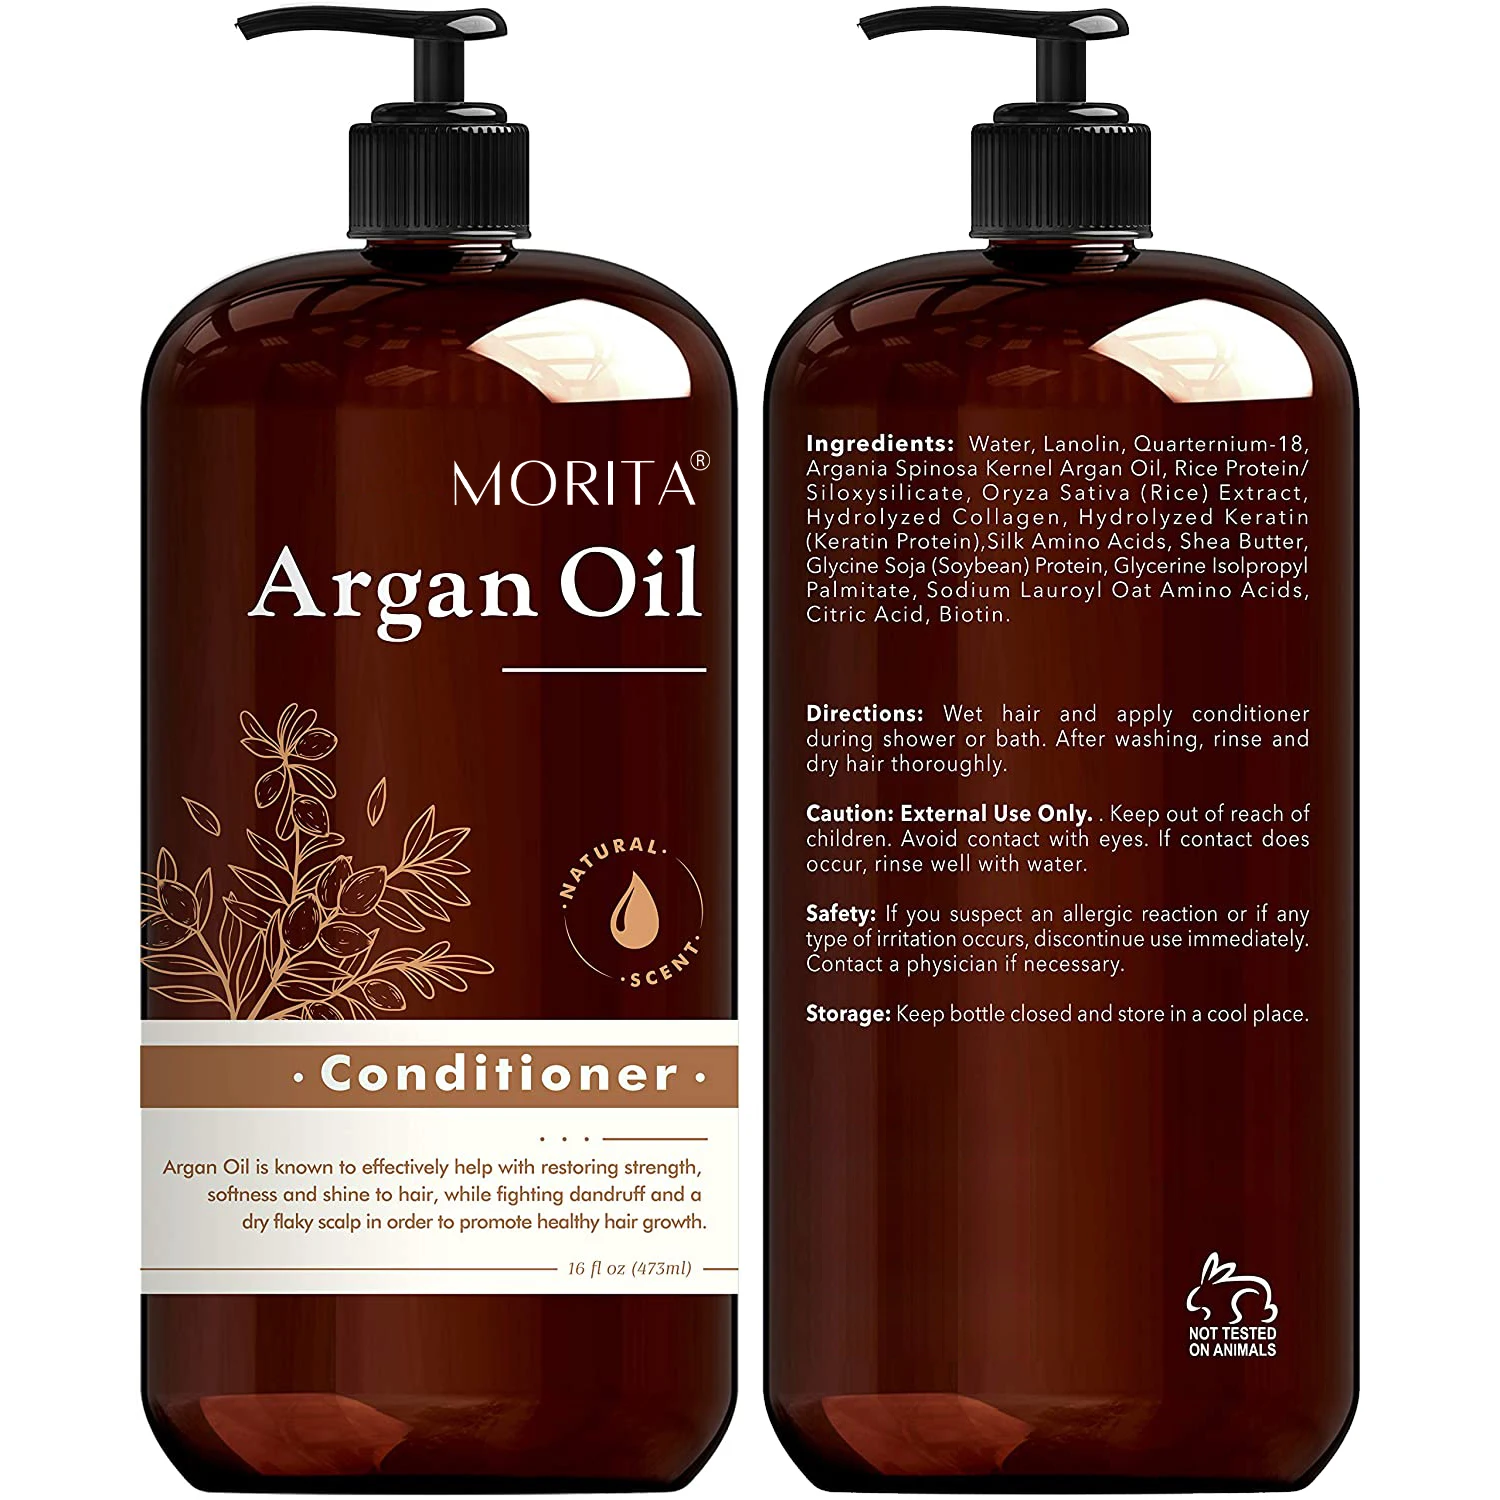 

Spot Wholesale Hair Smooth and Soft Hydrolyzed Keratin Argan Oil Restoring Strength Shampoo and Conditioner